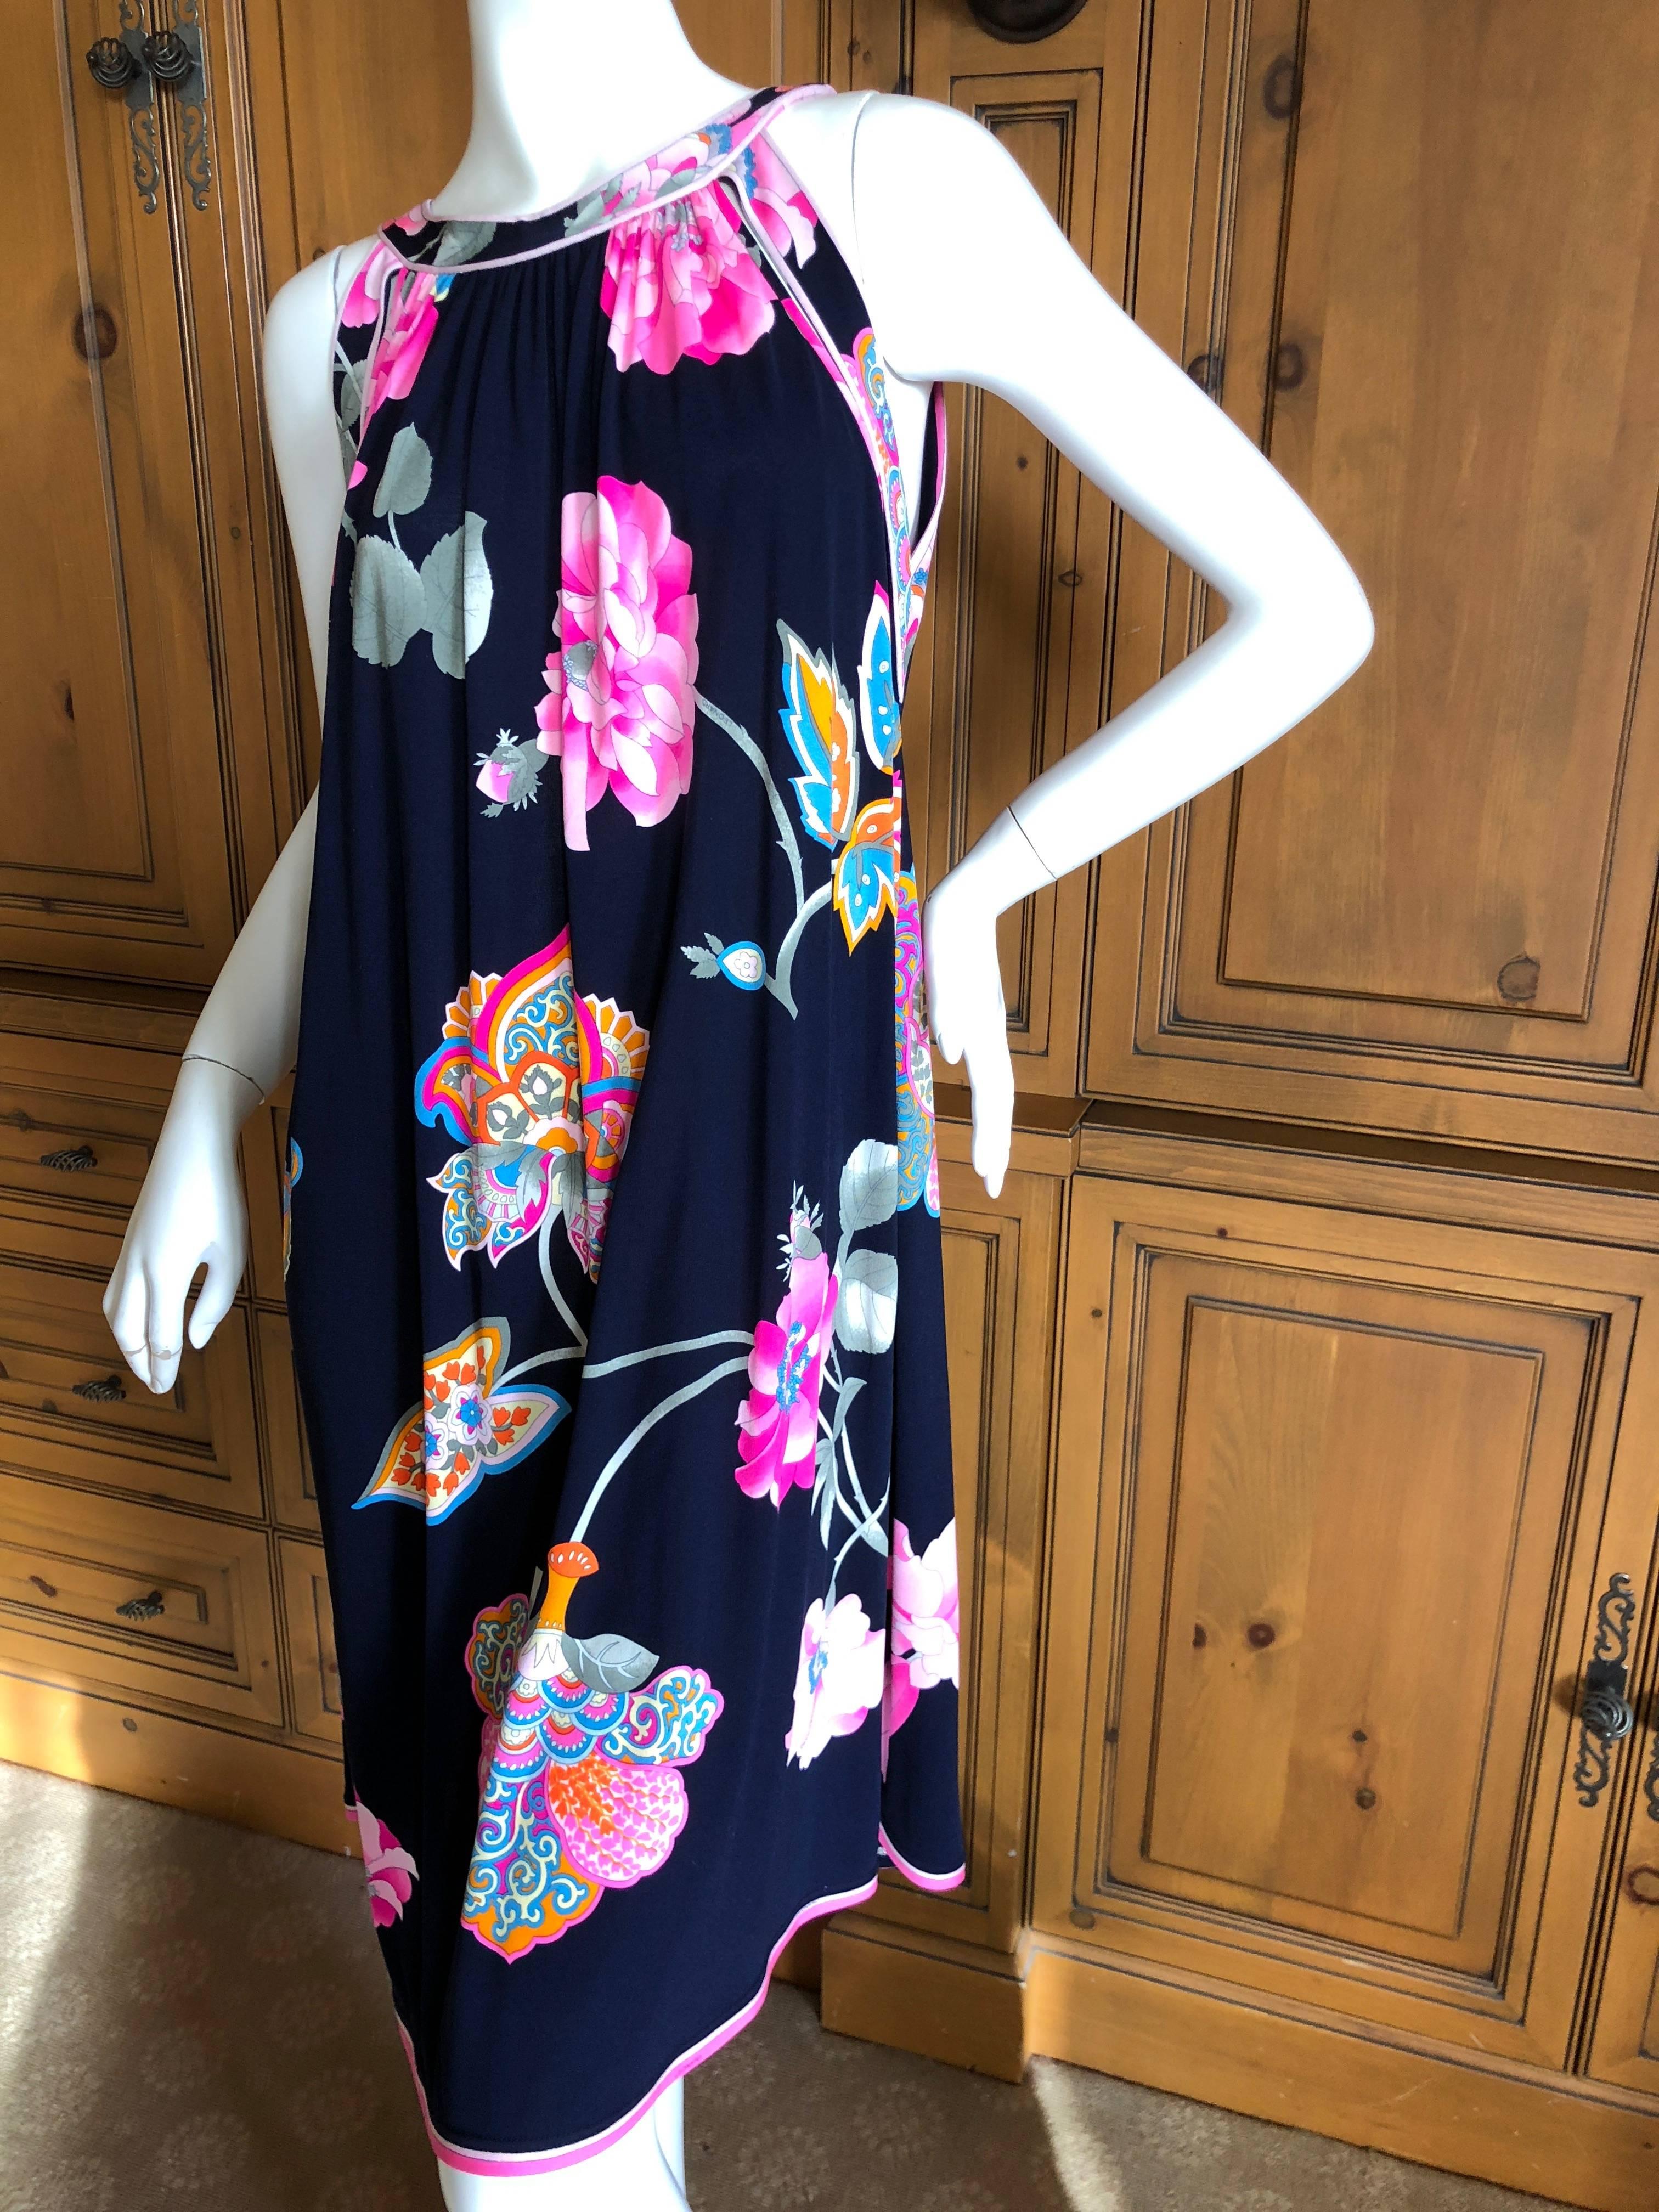 Leonard Paris Silk Jersey Sultan Print Maternity Dress
I mention it would be an excellent Maternity dress based on the measurements, 
they are very generous.
 New with Tags
Leonard Paris was a contemporary of Pucci, both houses creating brilliant